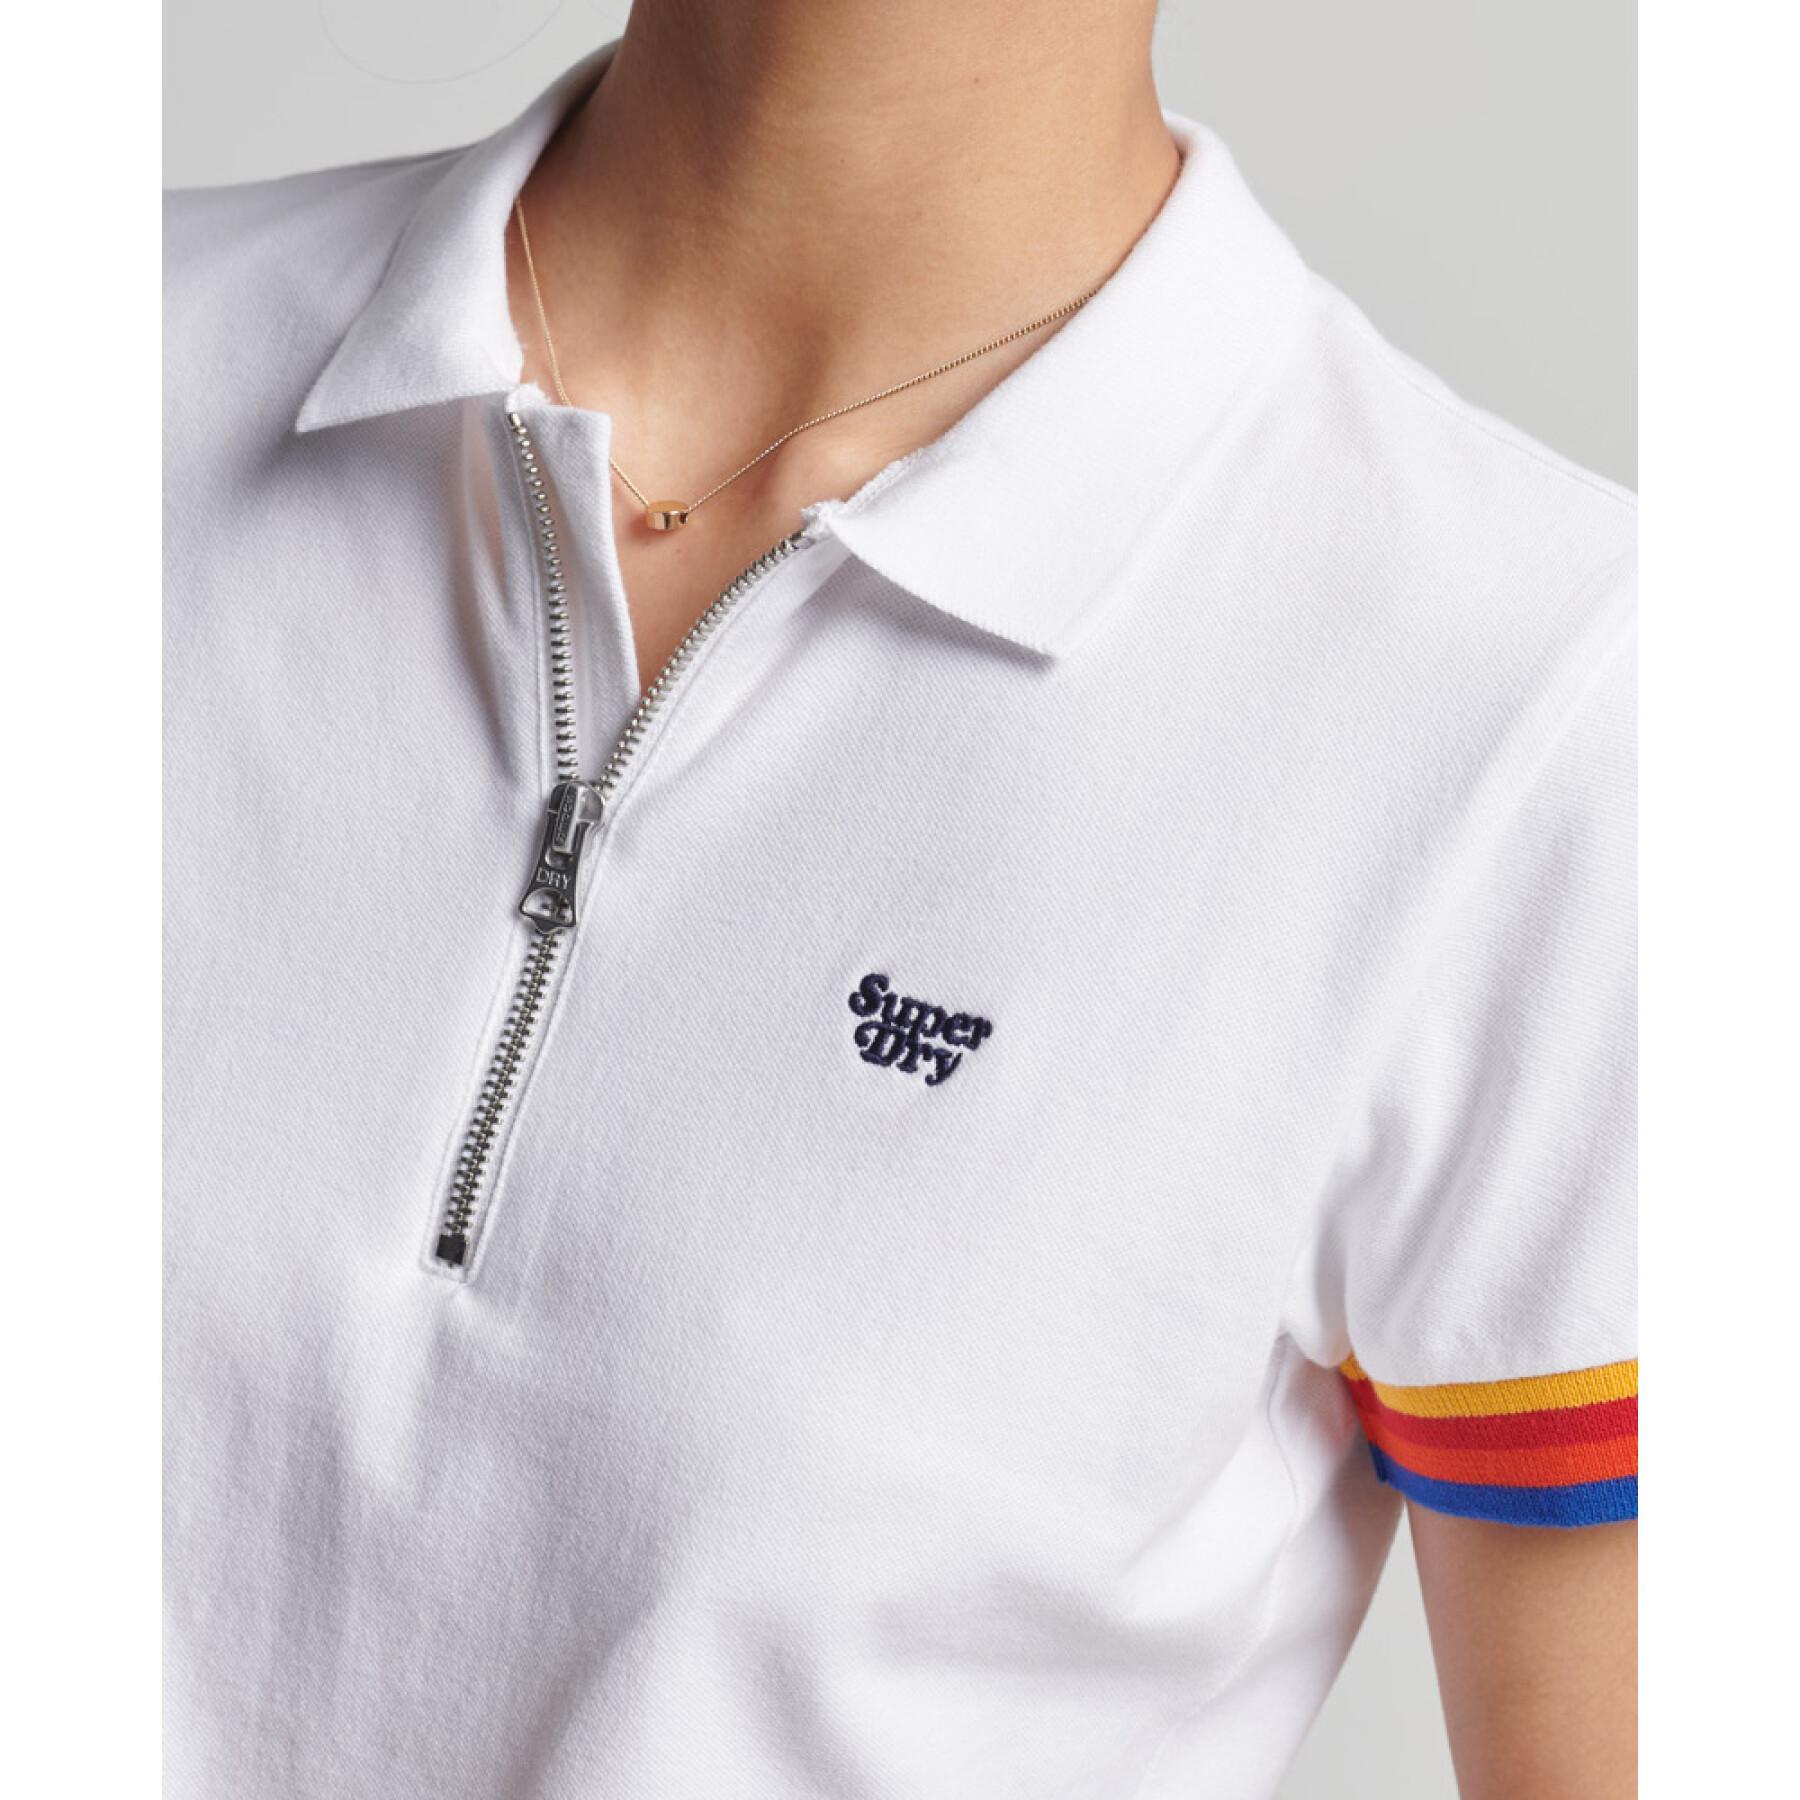 Organic cotton polo shirt for women Superdry Vintage